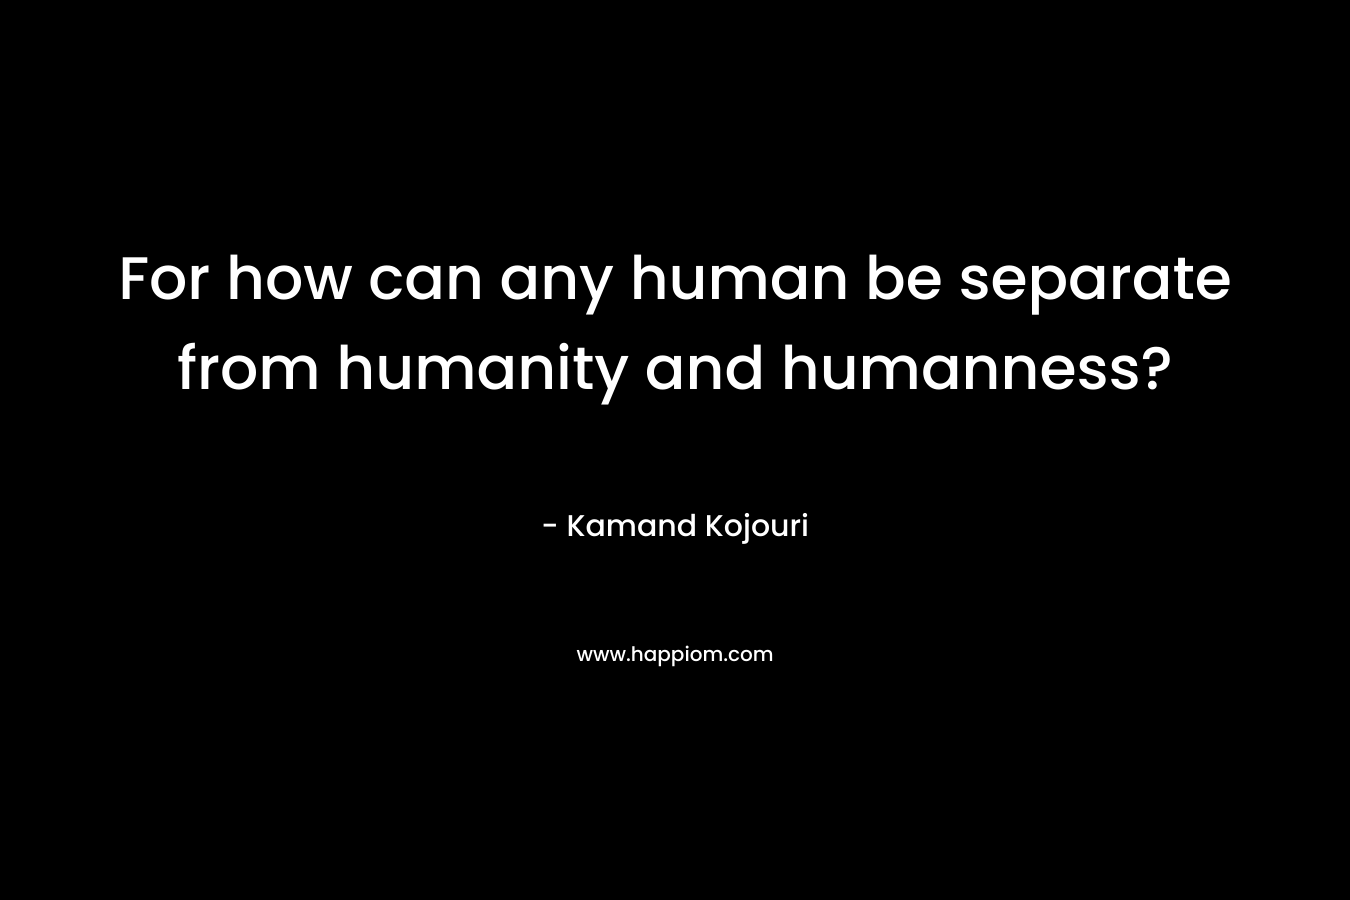 For how can any human be separate from humanity and humanness?